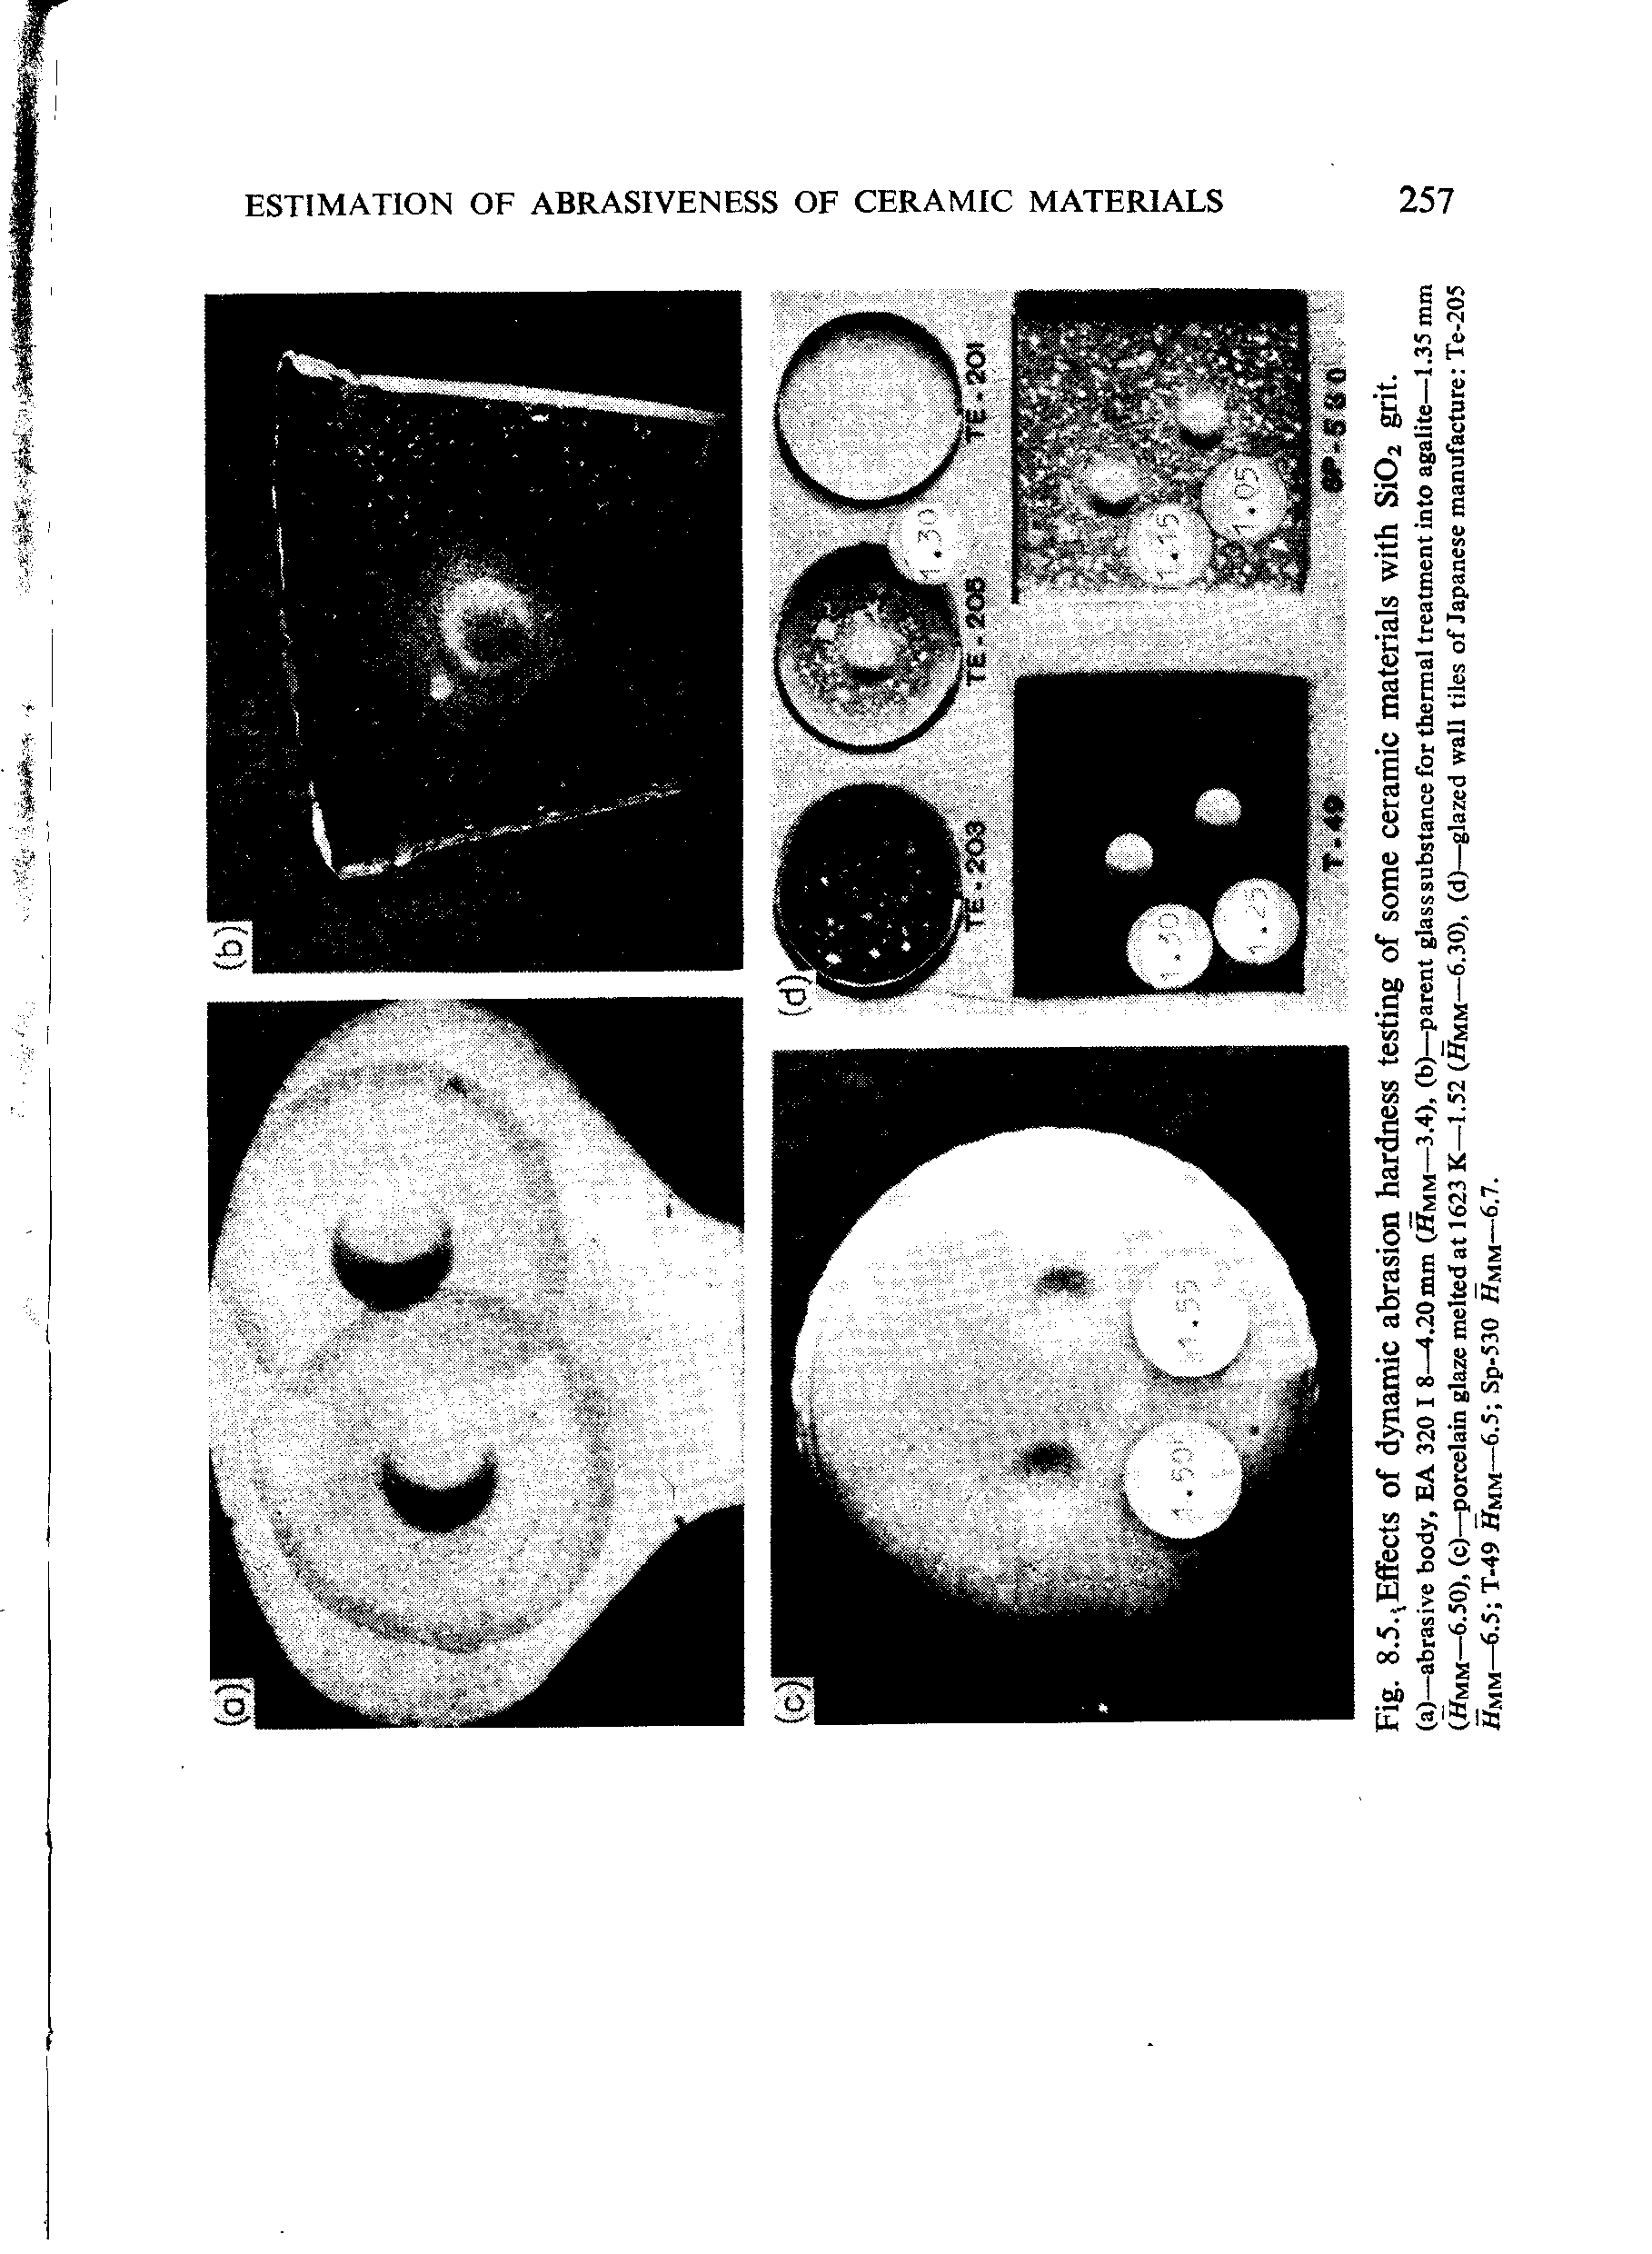 Fig. 8.5..,EfFects of dynamic abrasion hardness testing of some ceramic materials with Si02 grit.